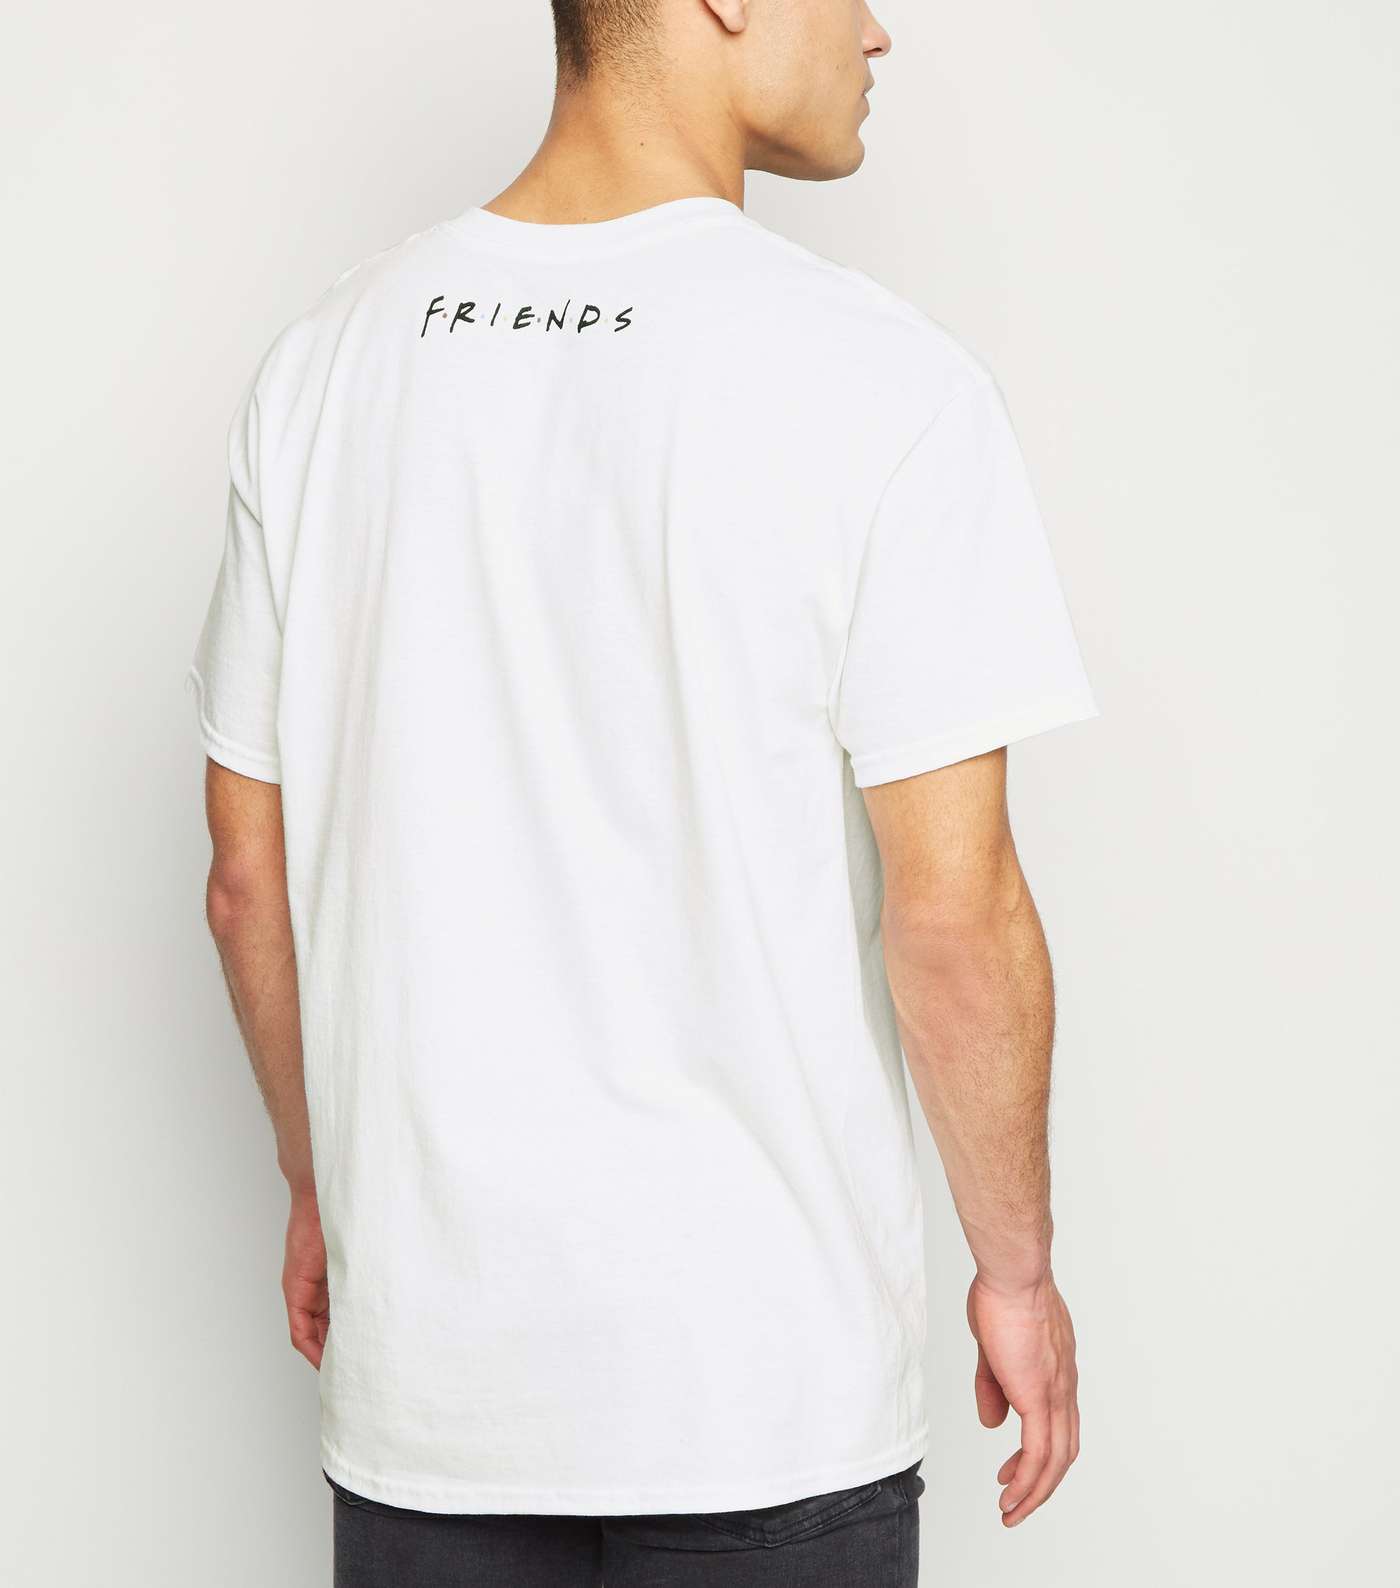 White They Know Friends Slogan T-Shirt Image 3